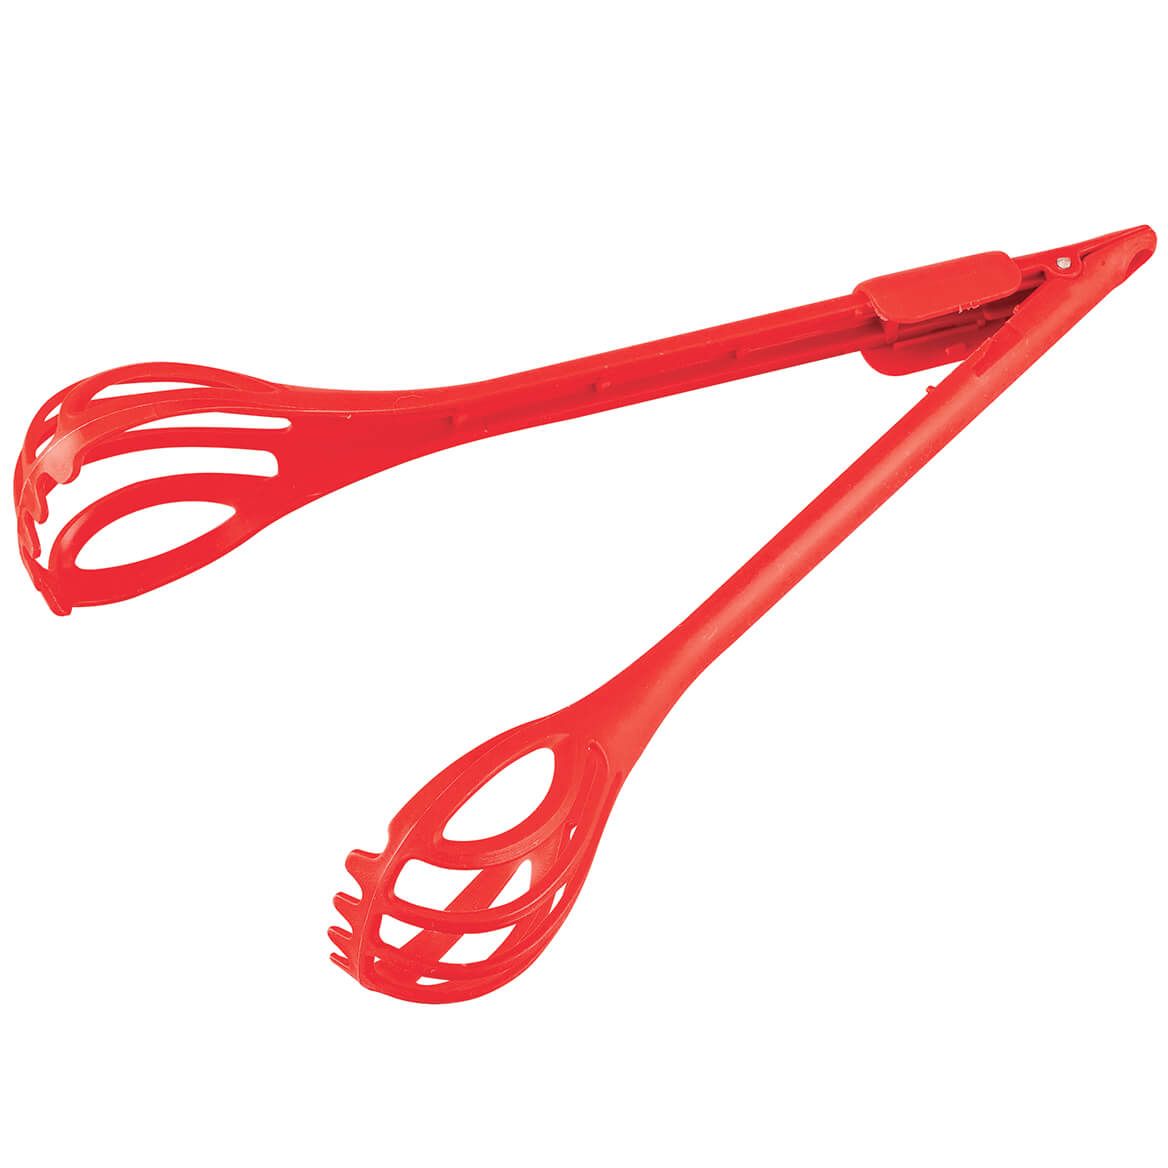 Multi-Purpose Whisking Tongs by Home Marketplace + '-' + 373207